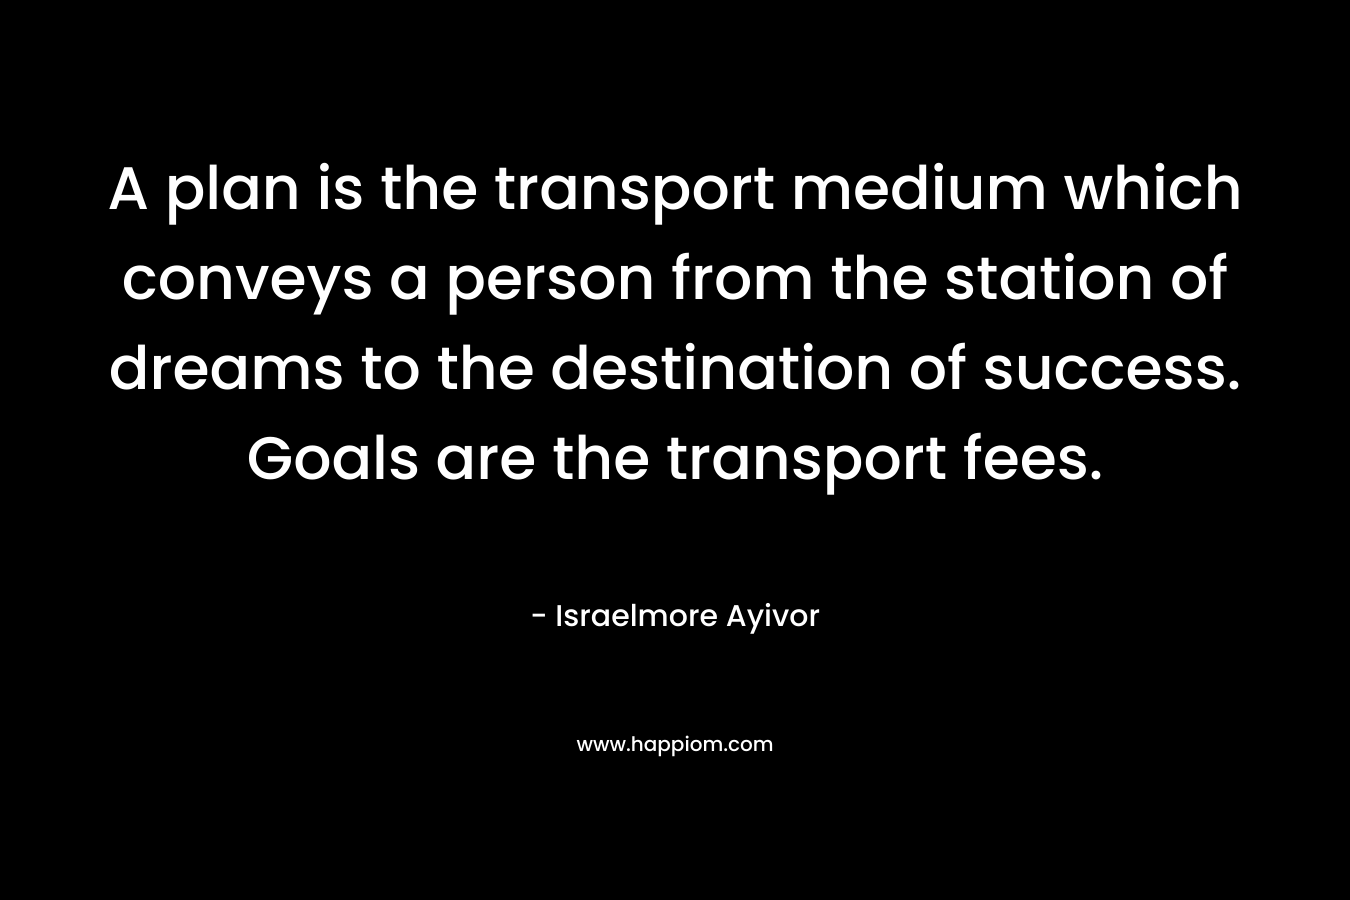 A plan is the transport medium which conveys a person from the station of dreams to the destination of success. Goals are the transport fees. – Israelmore Ayivor